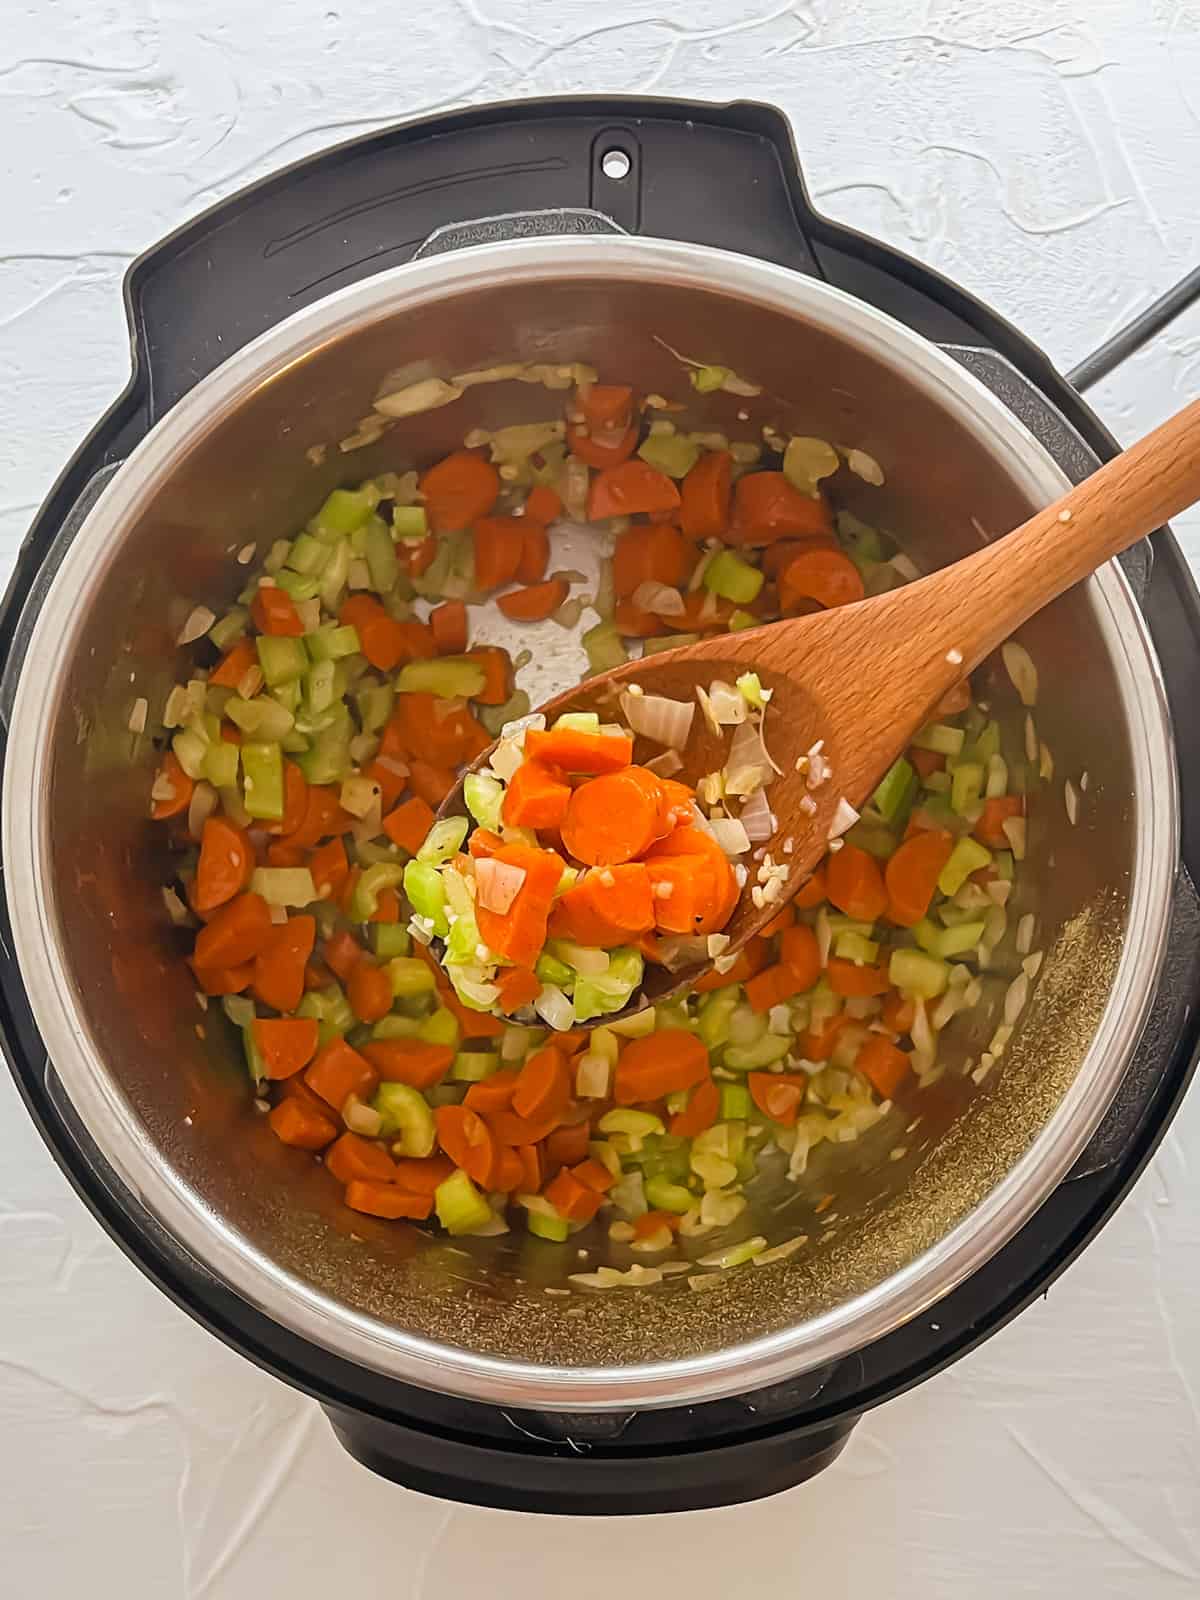 Carrots, celery, onions, and garlic sauteing in an Instant Pot.